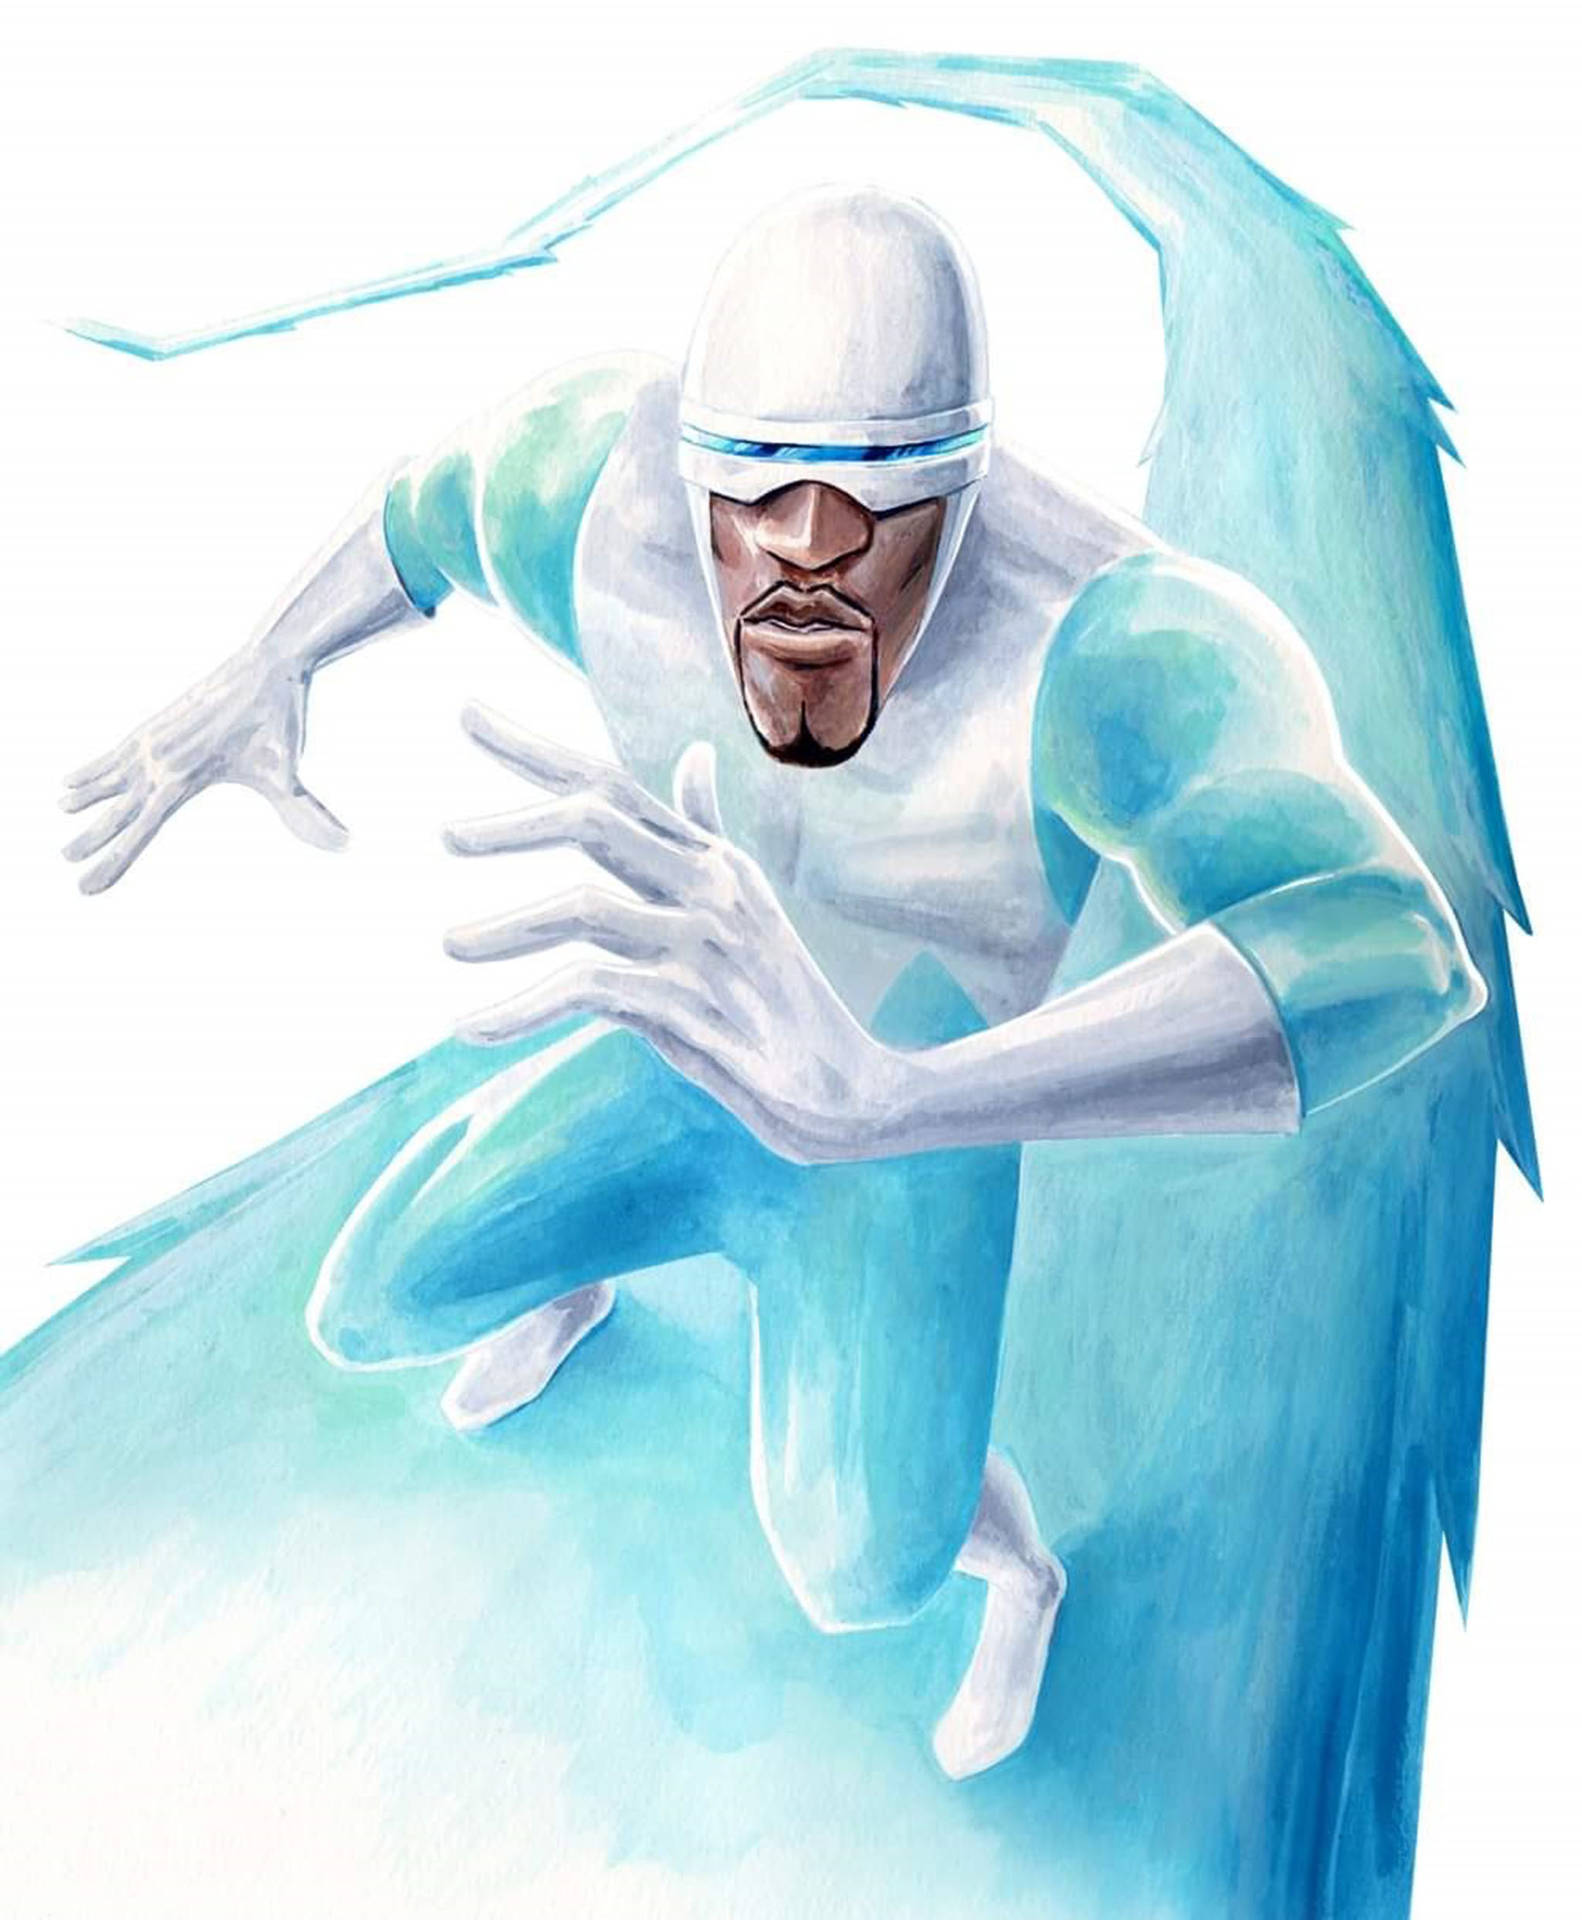 "frozone Ice Surfing His Way Through The City!" Wallpaper